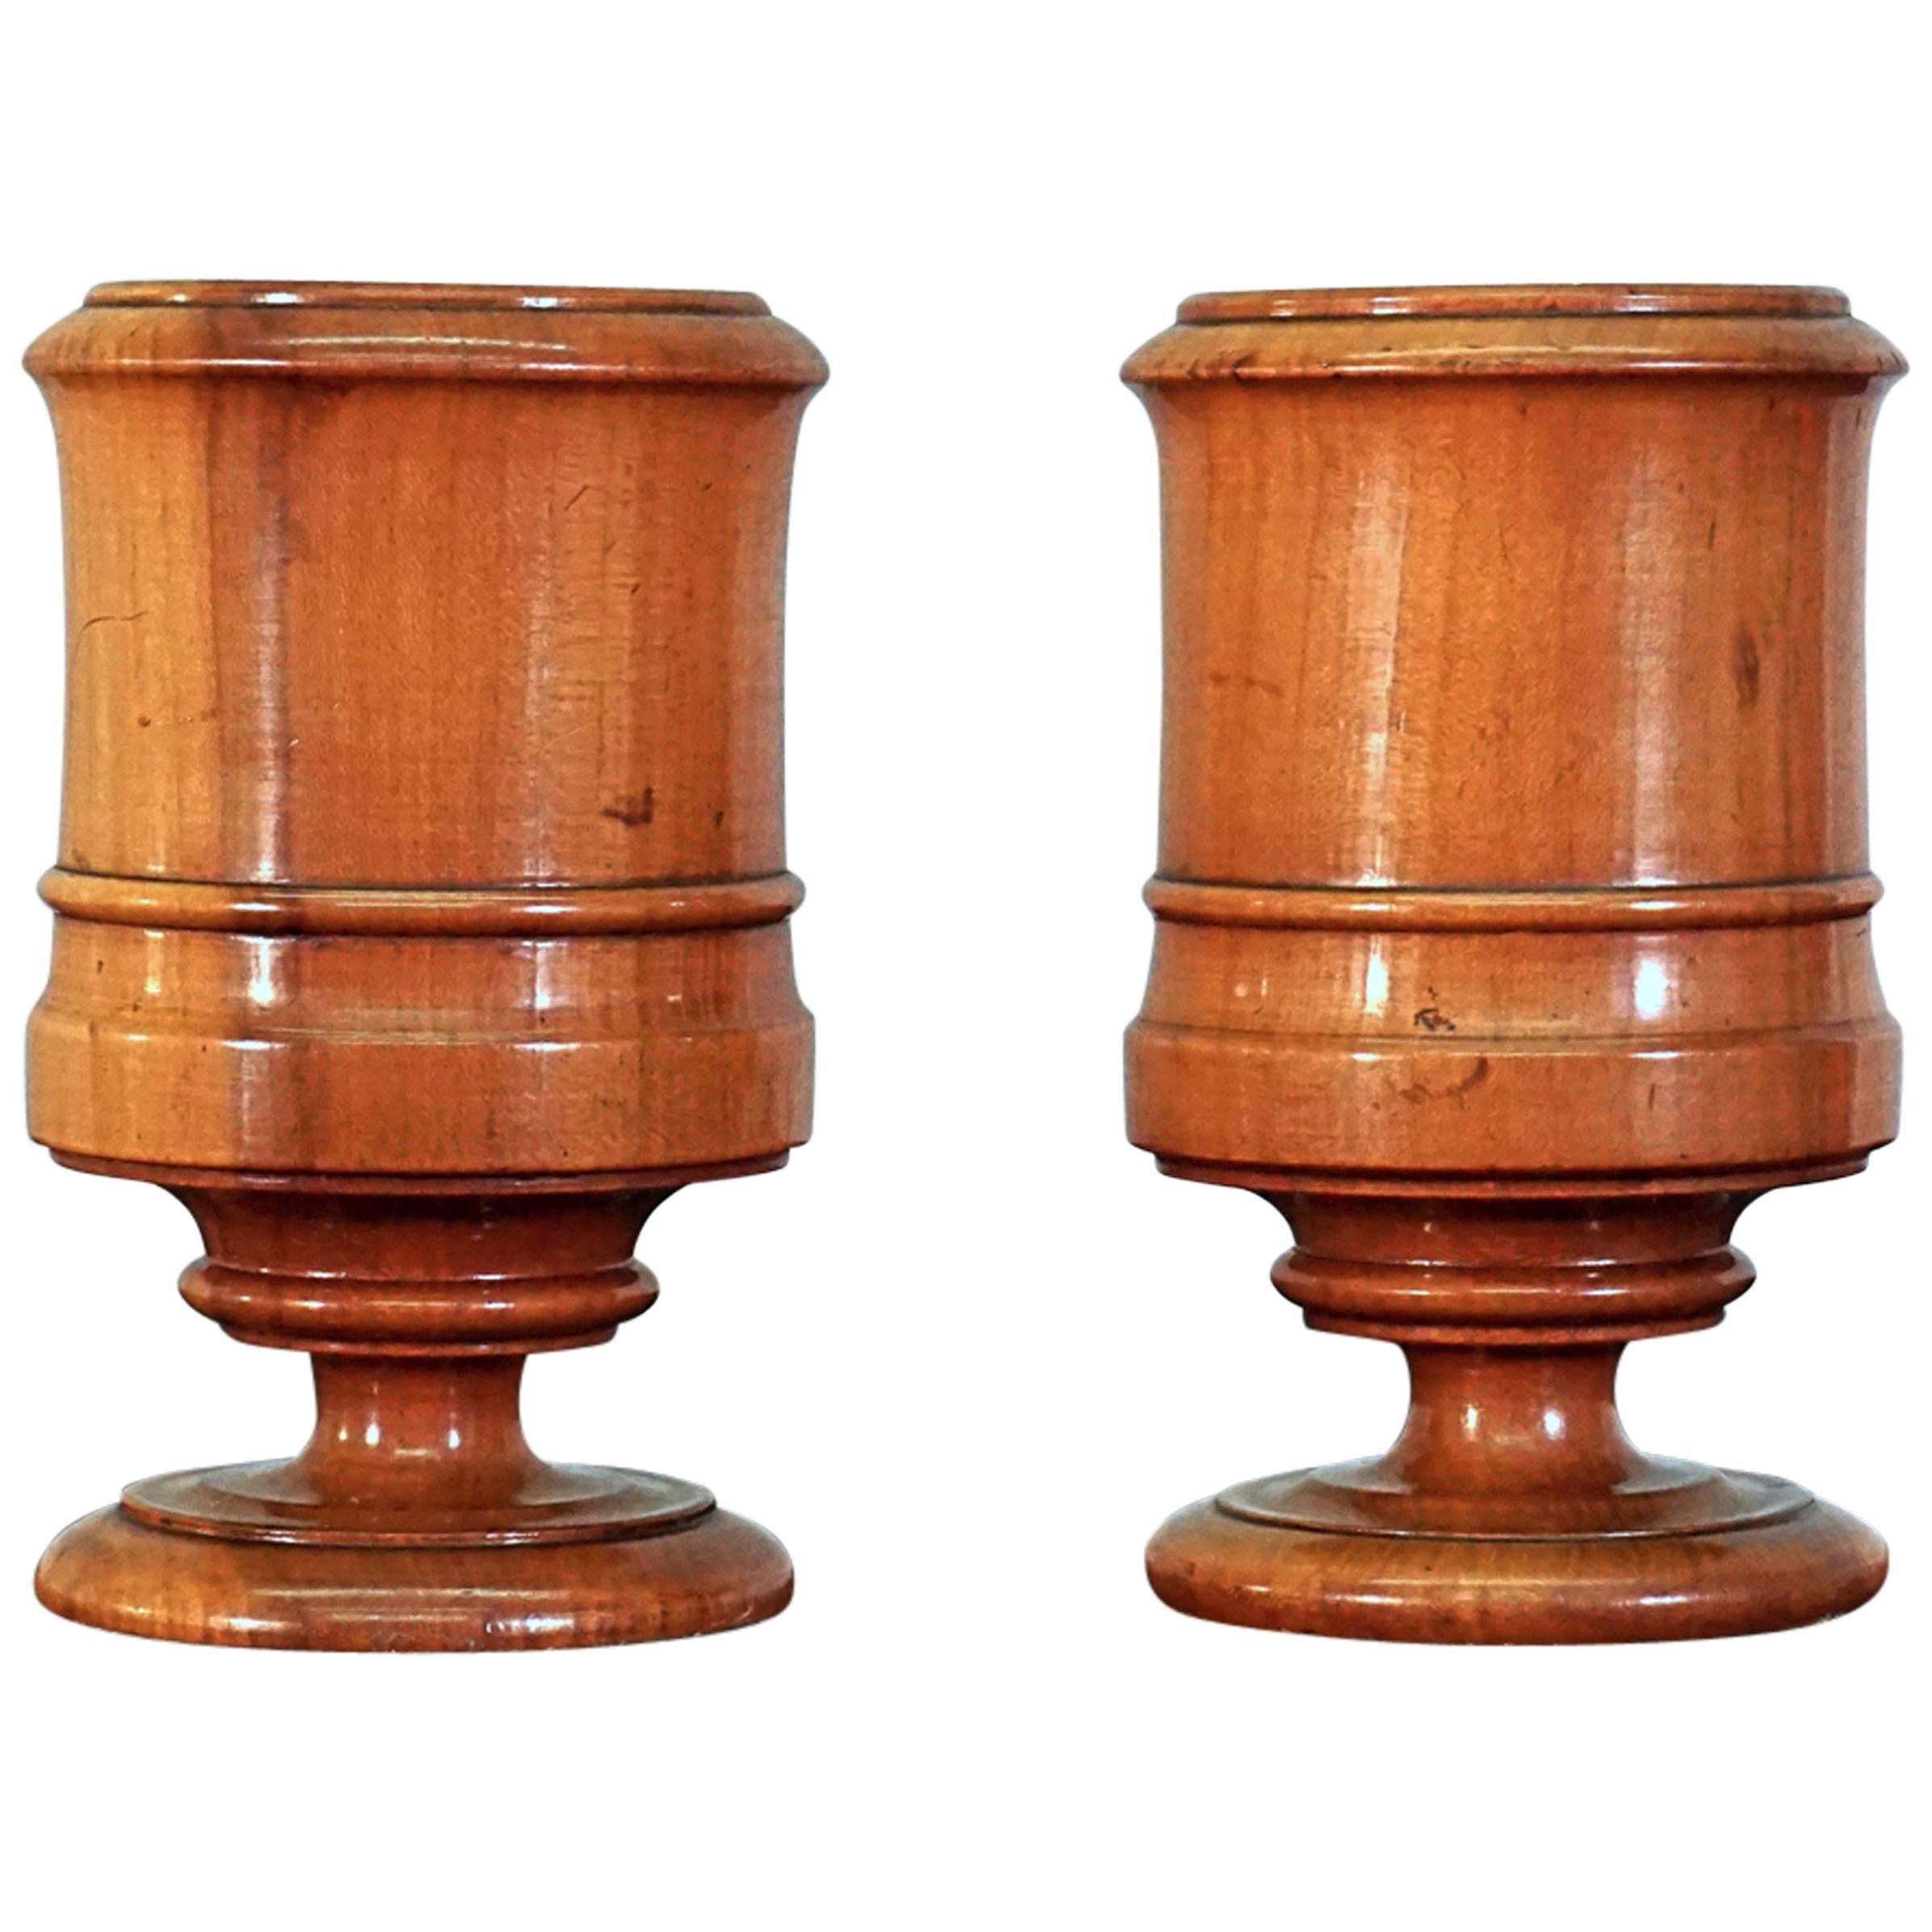 Pair of 19th Century Fruitwood Treen Goblets